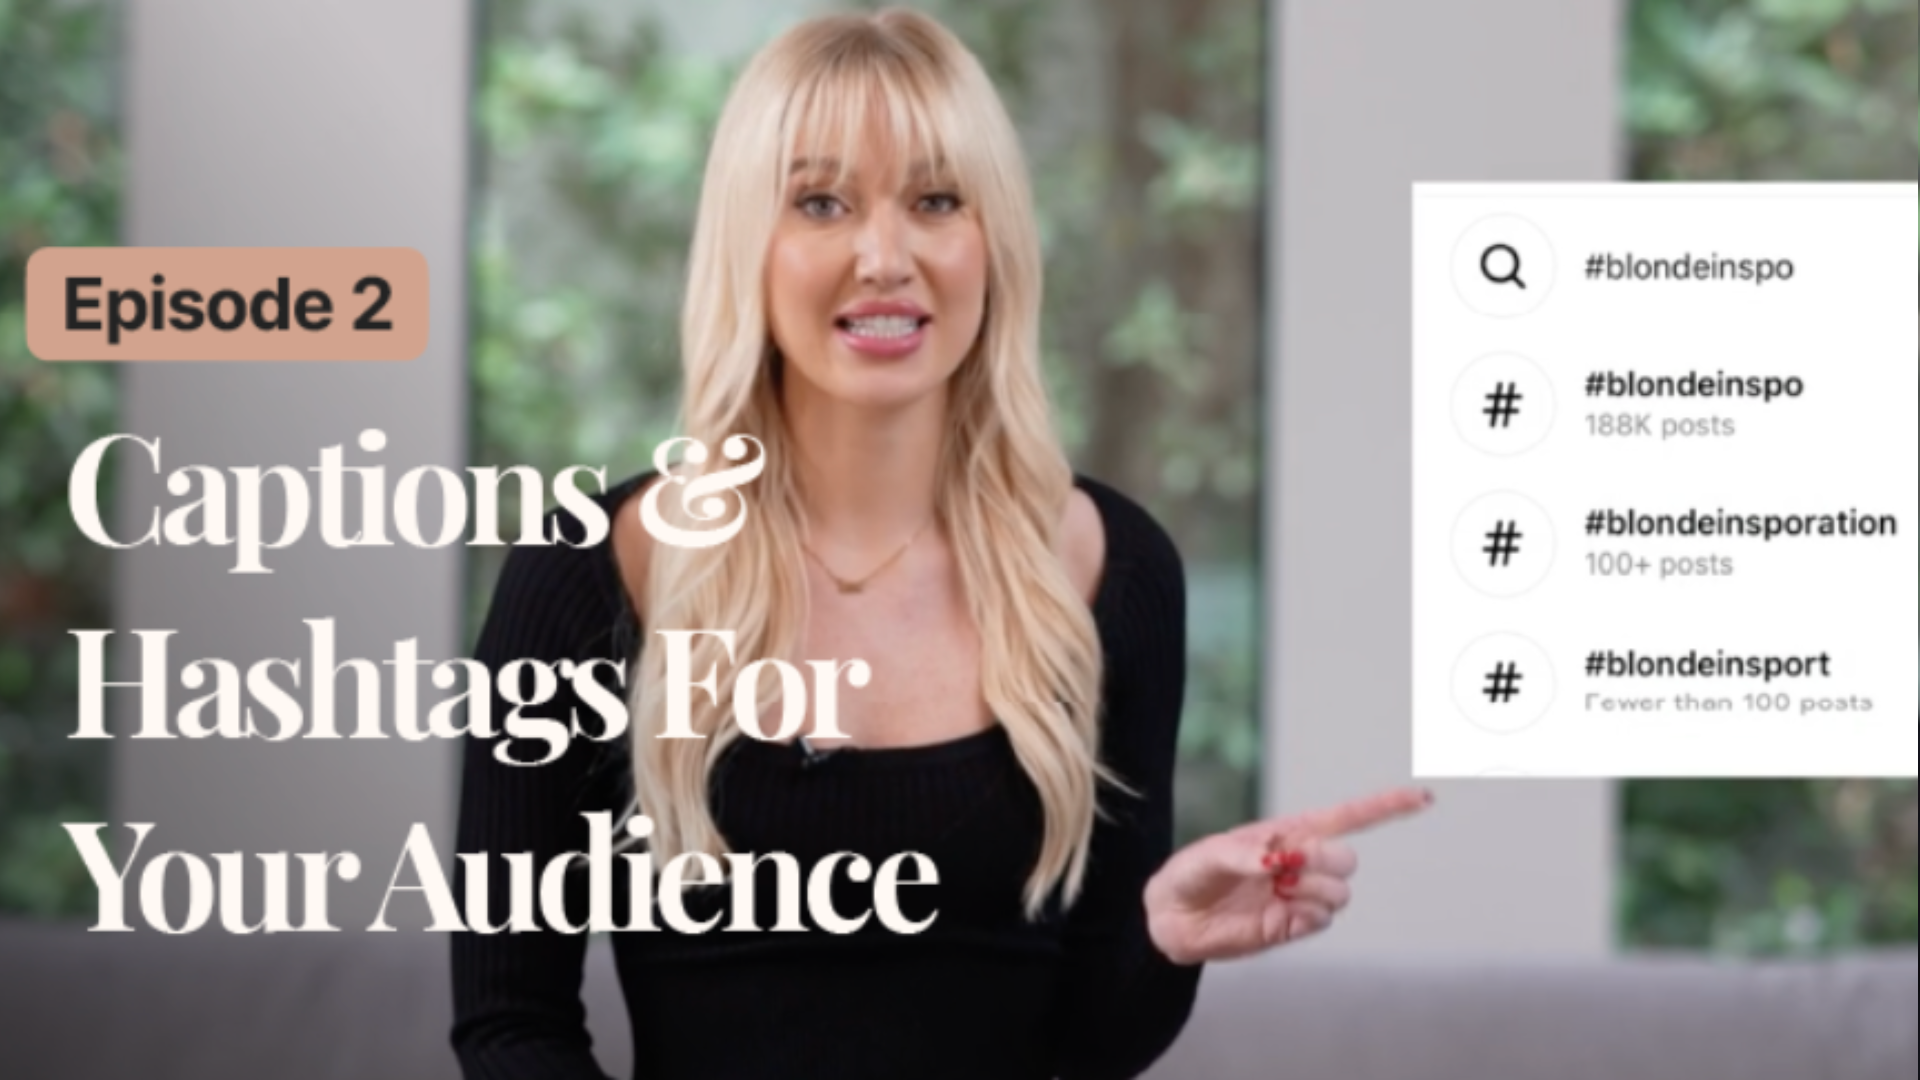 captions-hashtags-for-your-audience